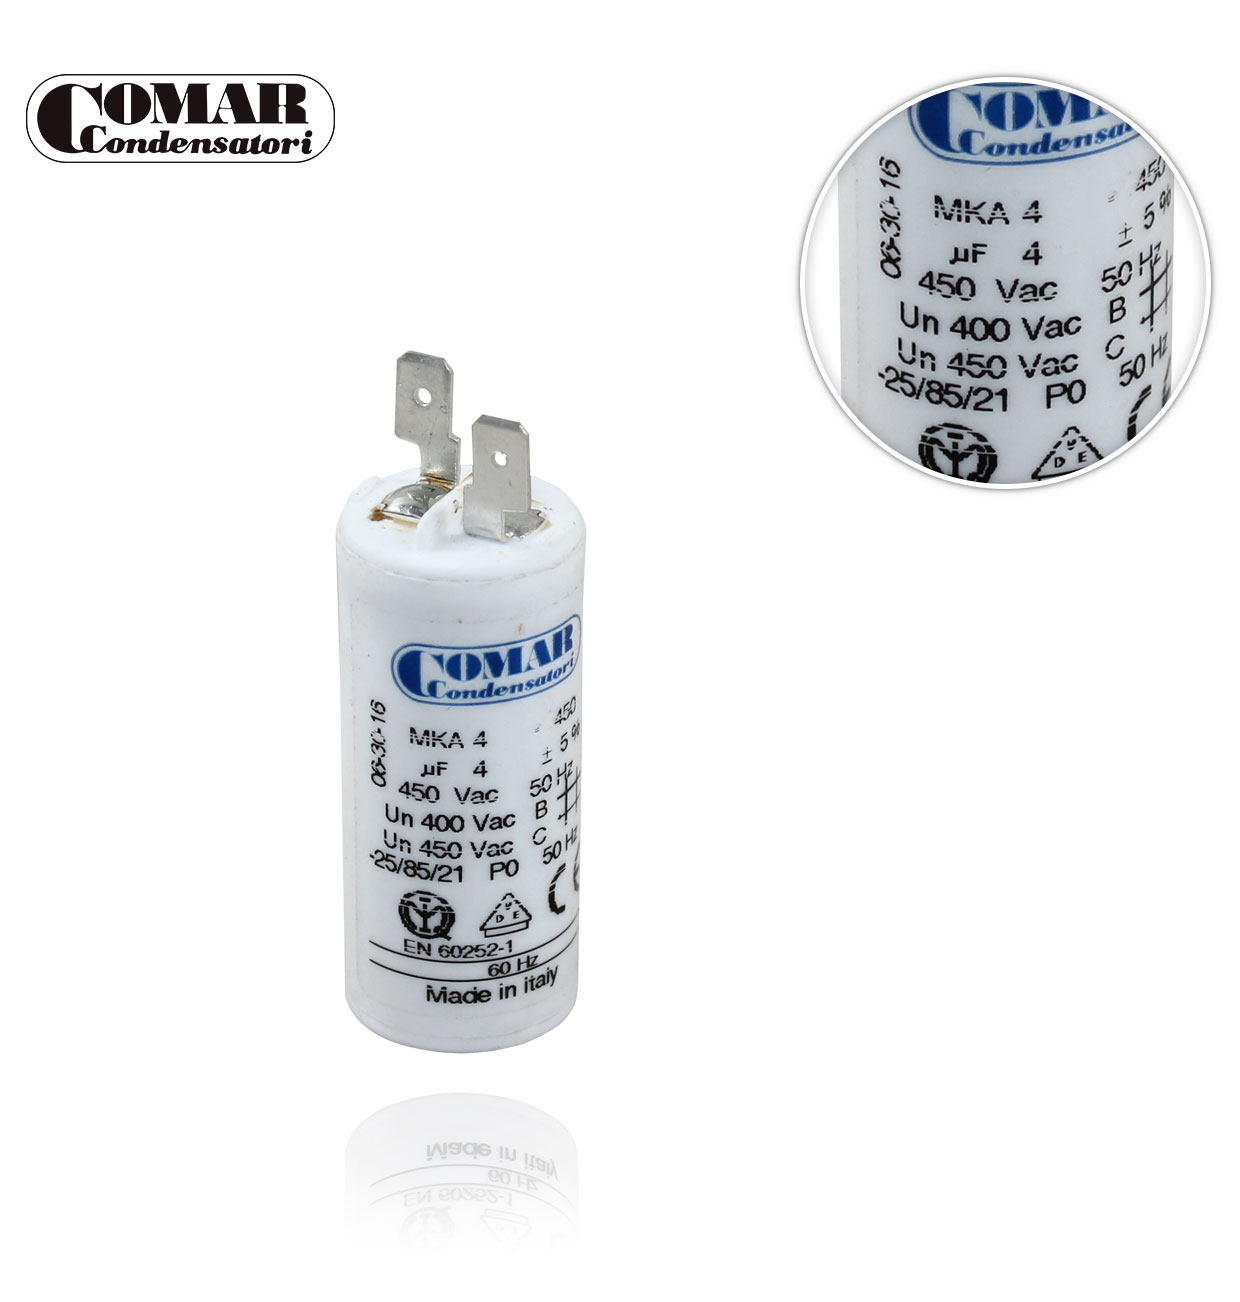 CON/ 4µF 450V WITHOUT SCREW 25x57 SINGLE FASTON CAPACITOR